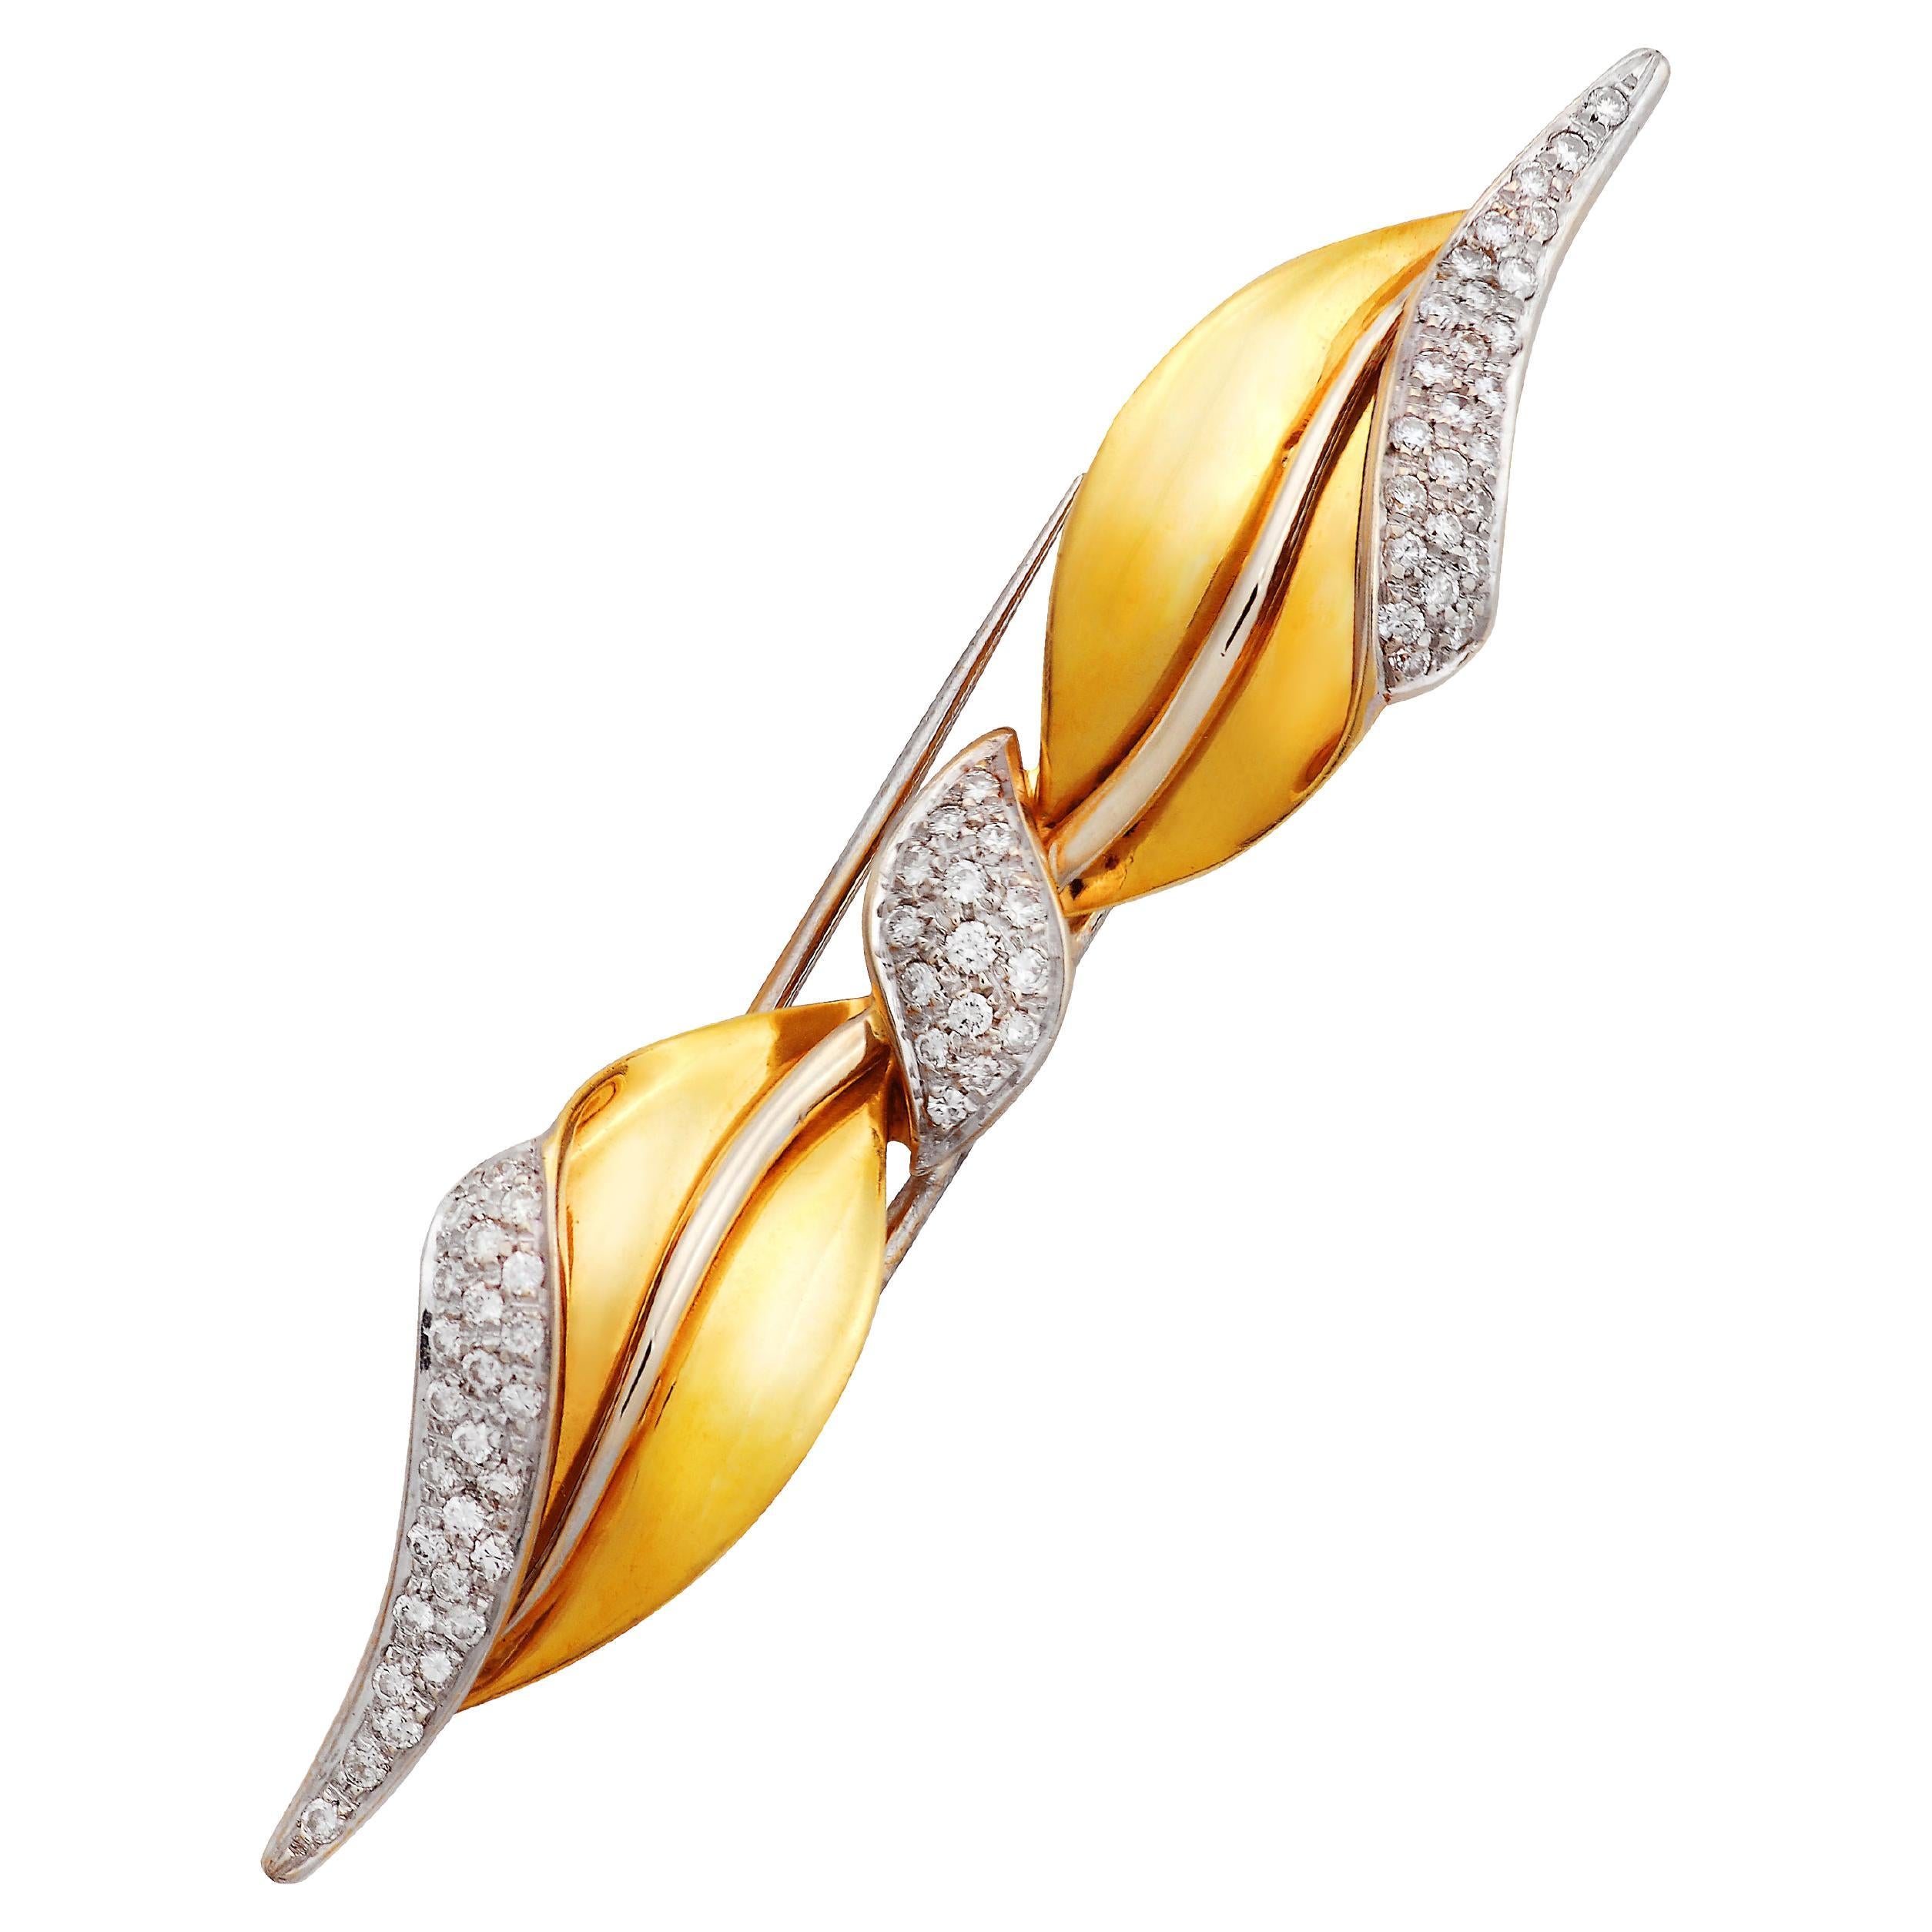 Dimos 18k Gold Twist Leaves Brooch with Diamonds